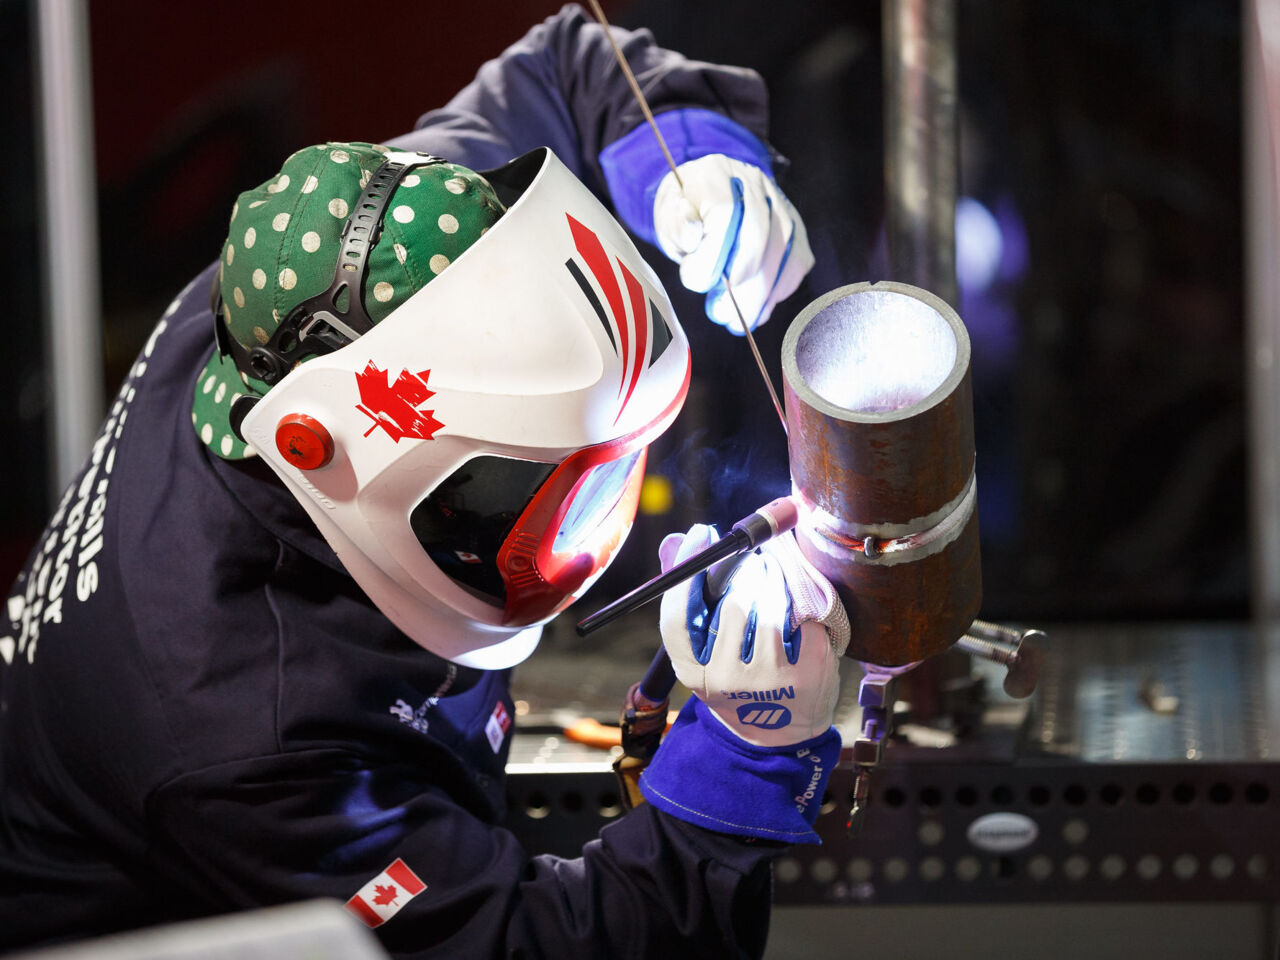 A welding competitor from Canada at WorldSkills Kazan 2019.